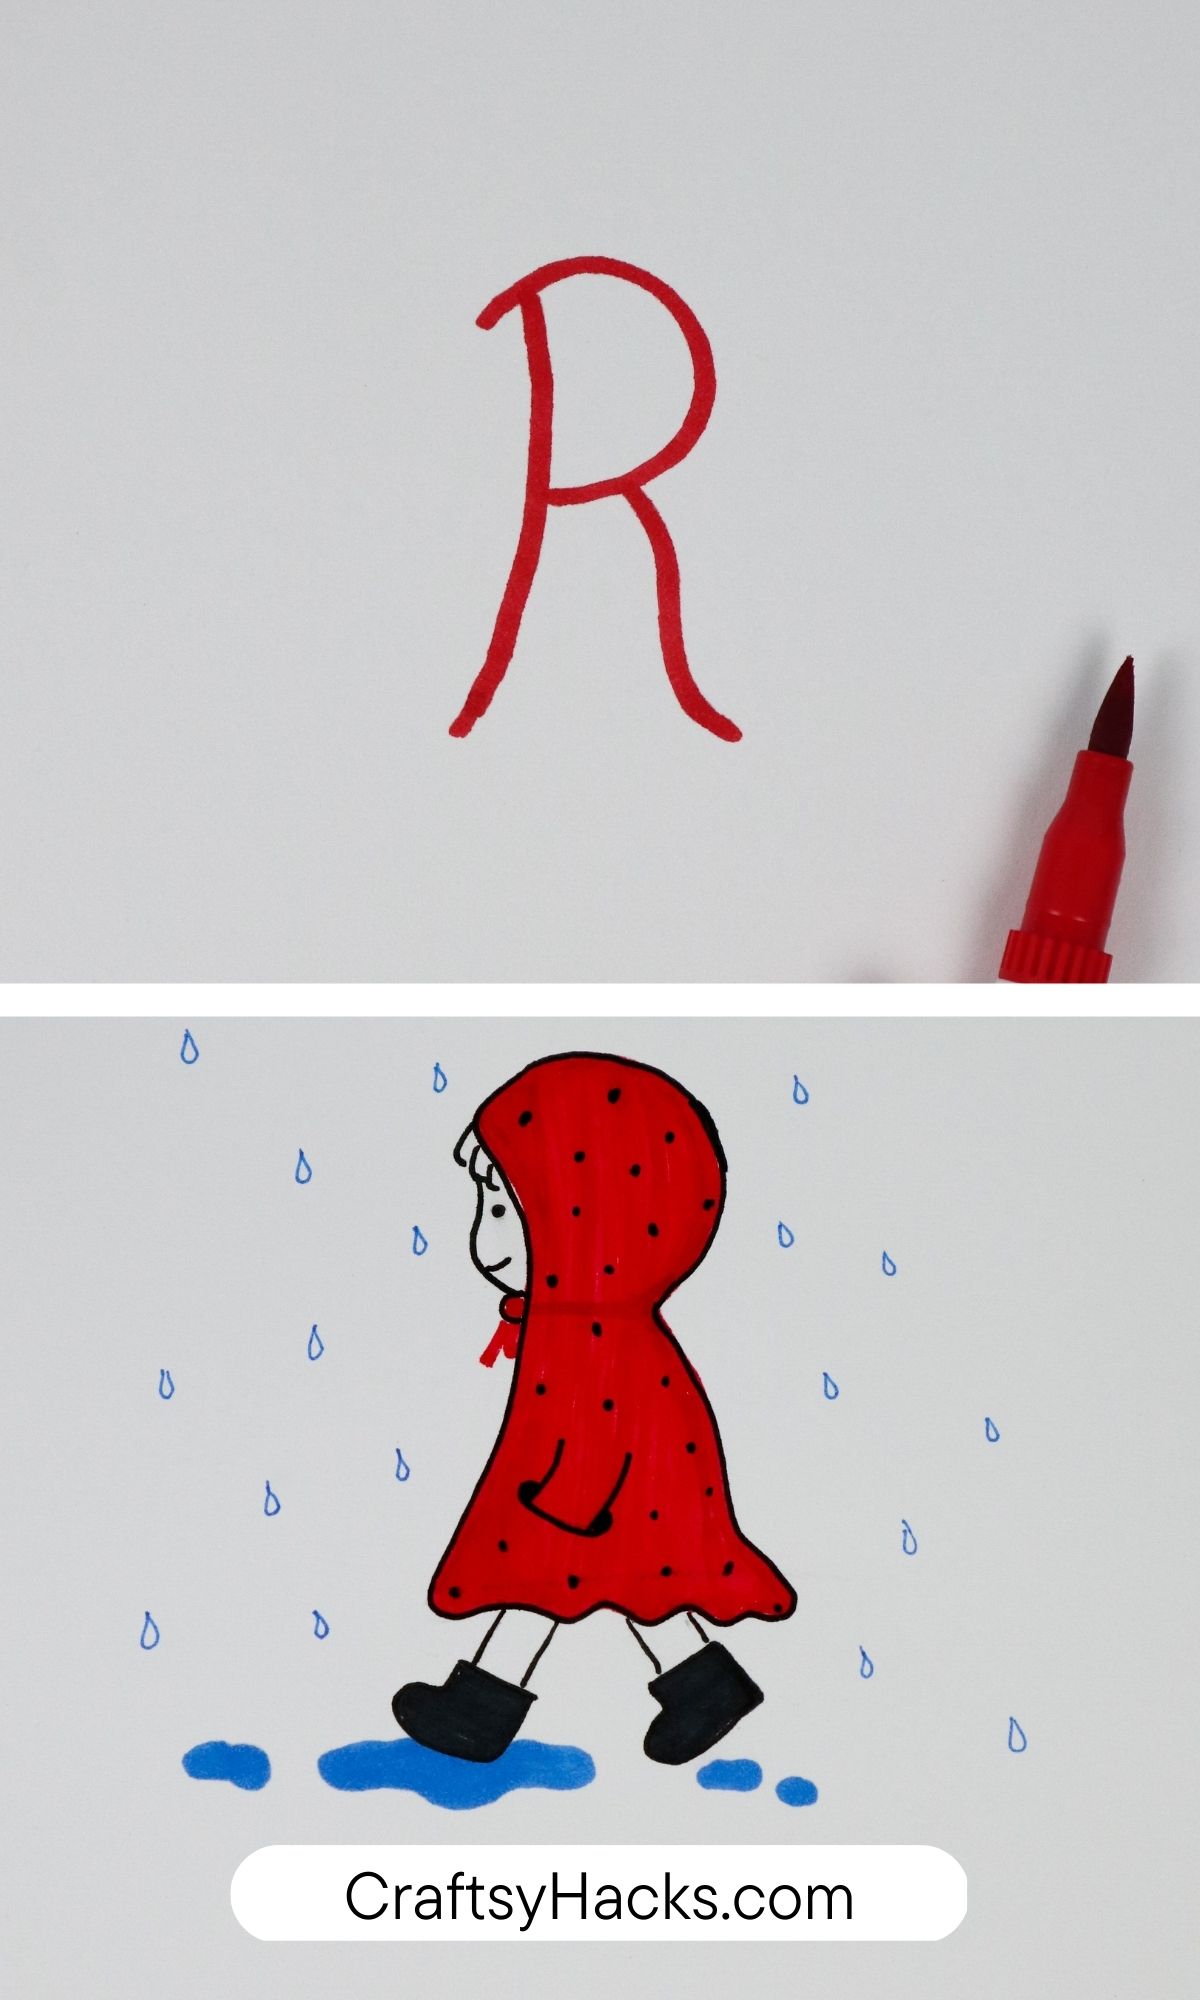 R to girl in raincoat drawing